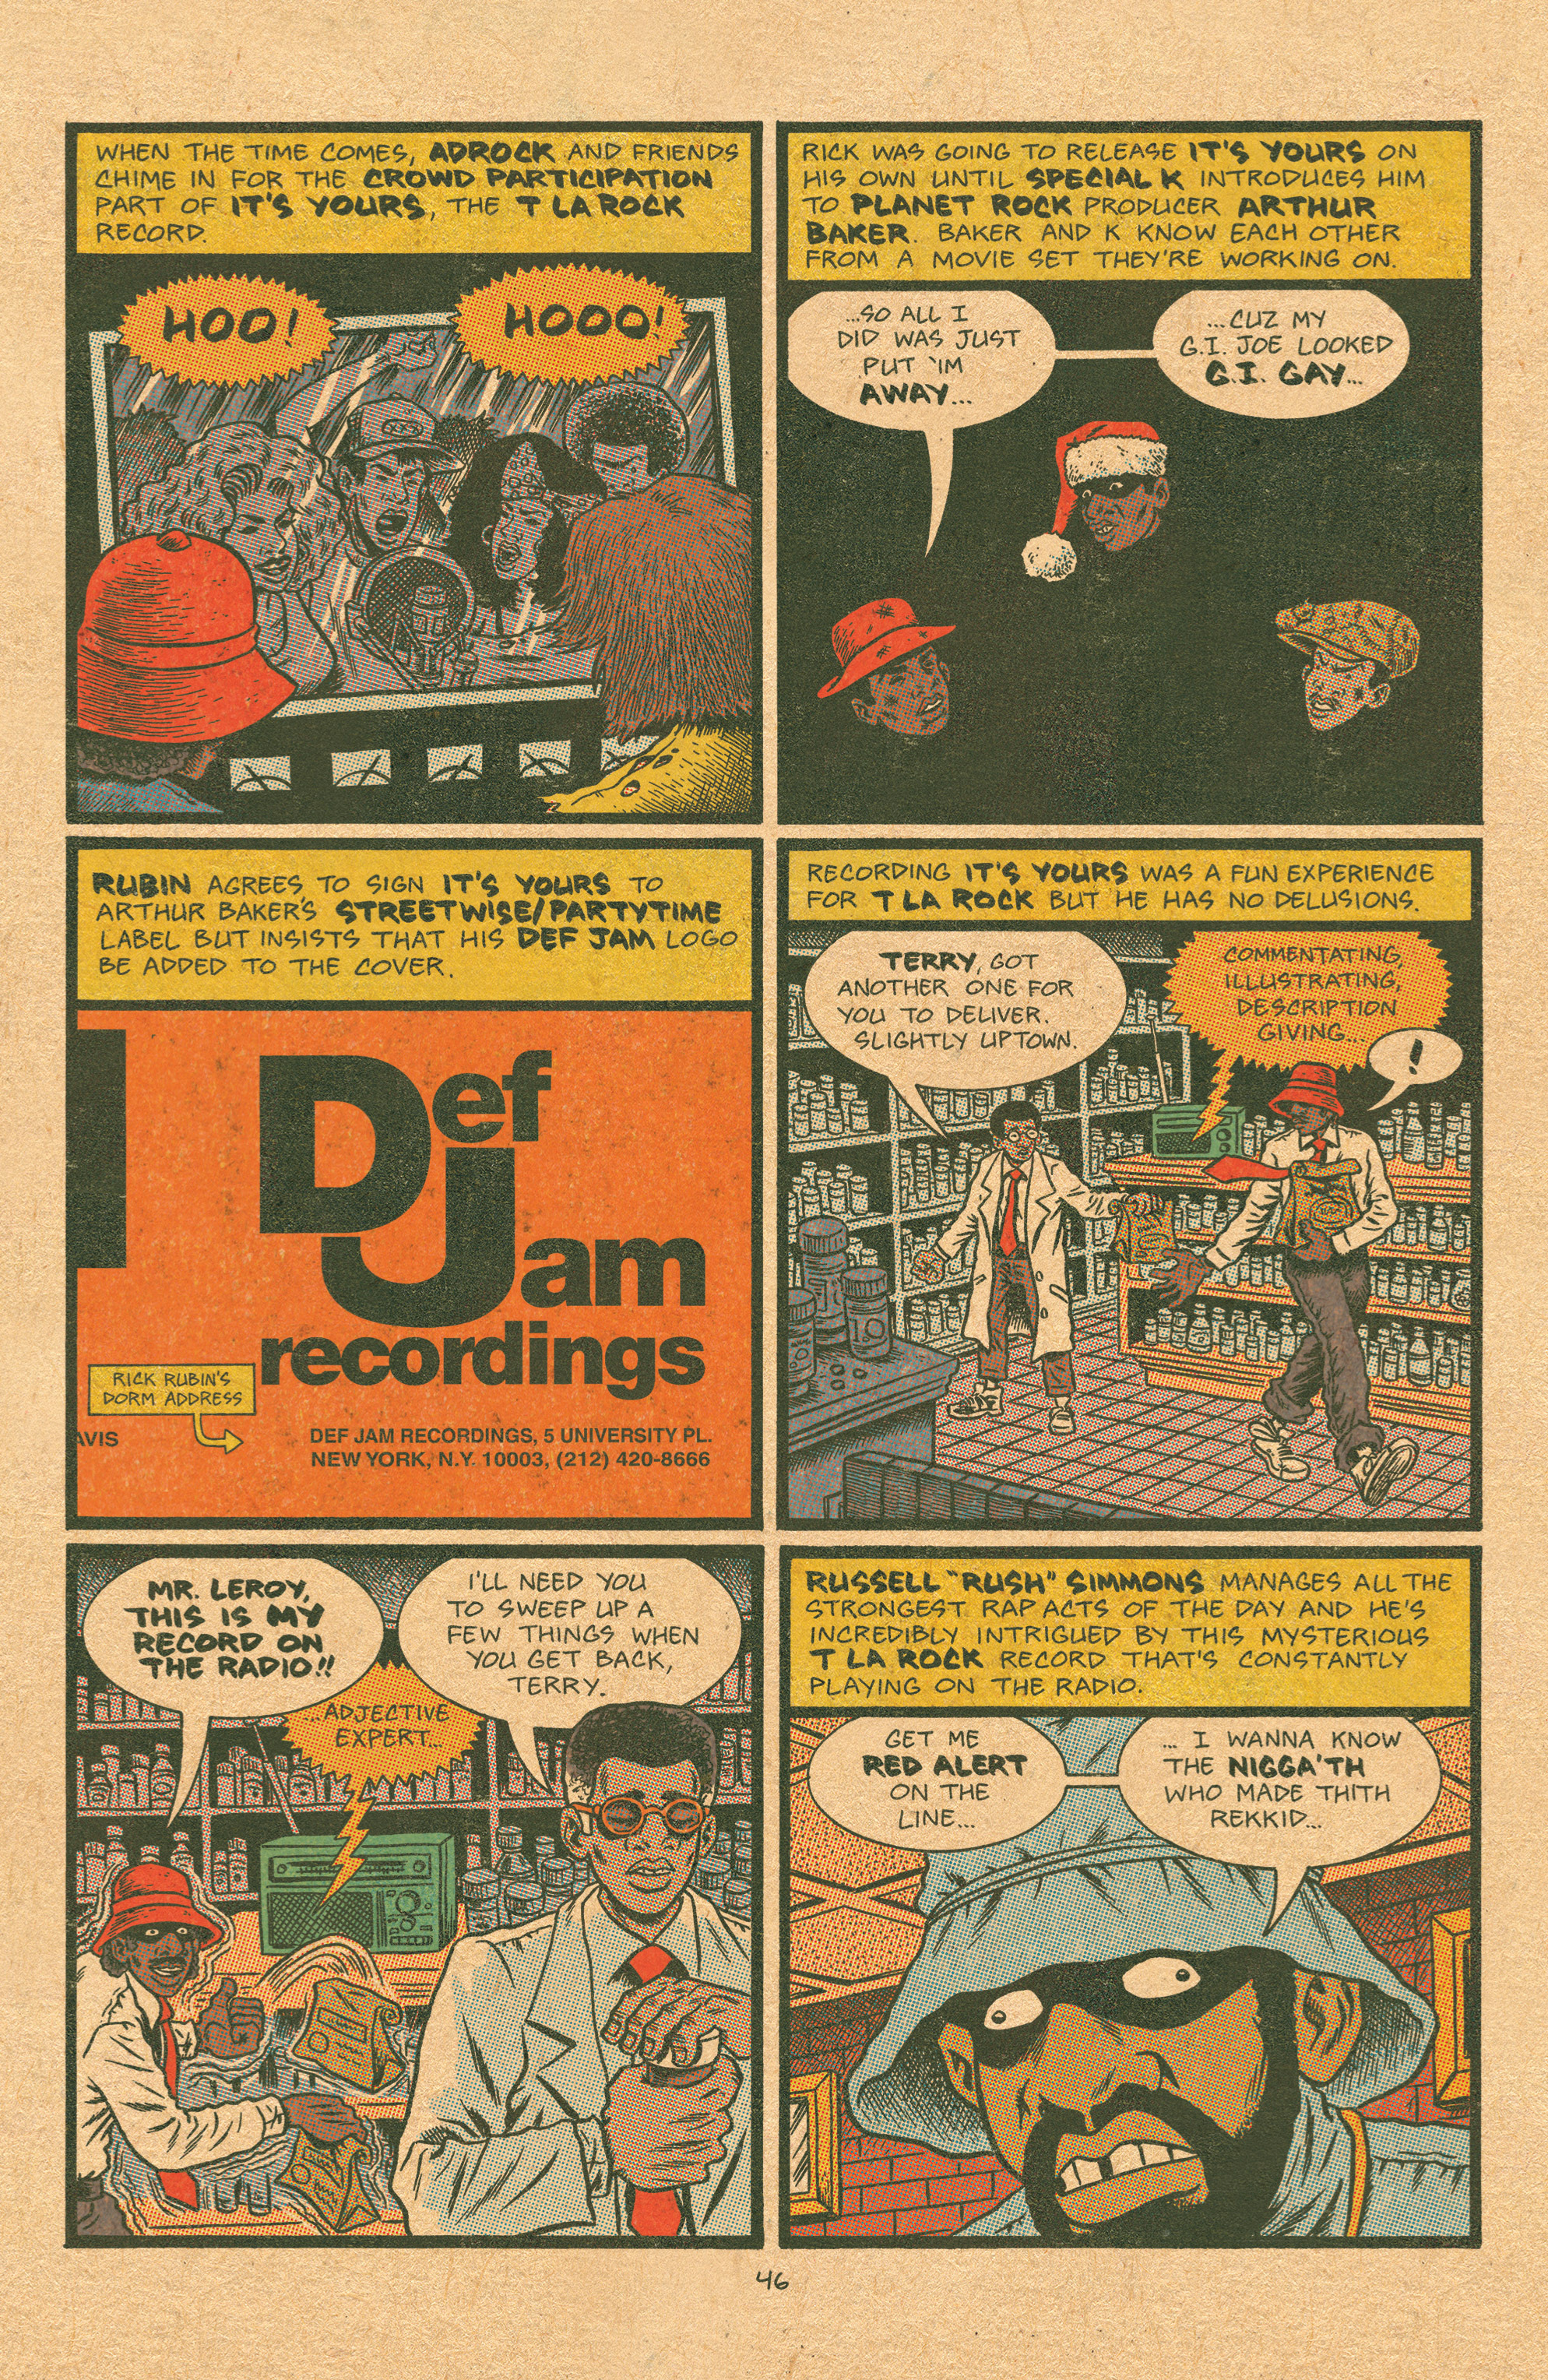 Read online Free Comic Book Day 2015 comic -  Issue # Hip Hop Family Tree Three-in-One - Featuring Cosplayers - 20